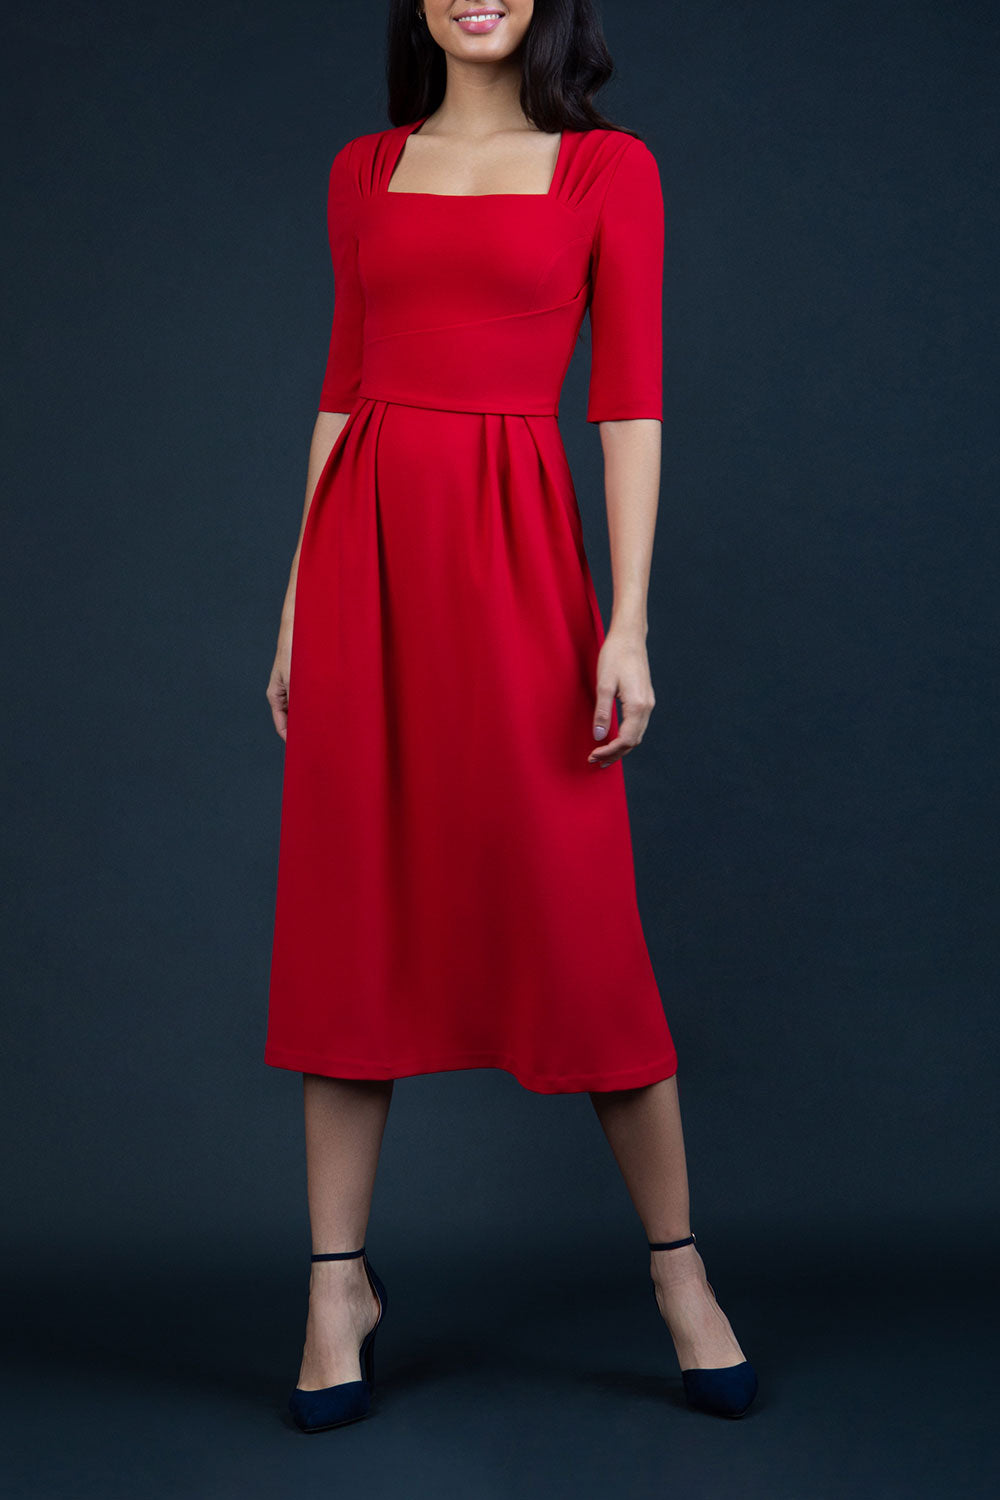 model is wearing diva catwalk mimi maxi sleeved dress with square neckline in red front